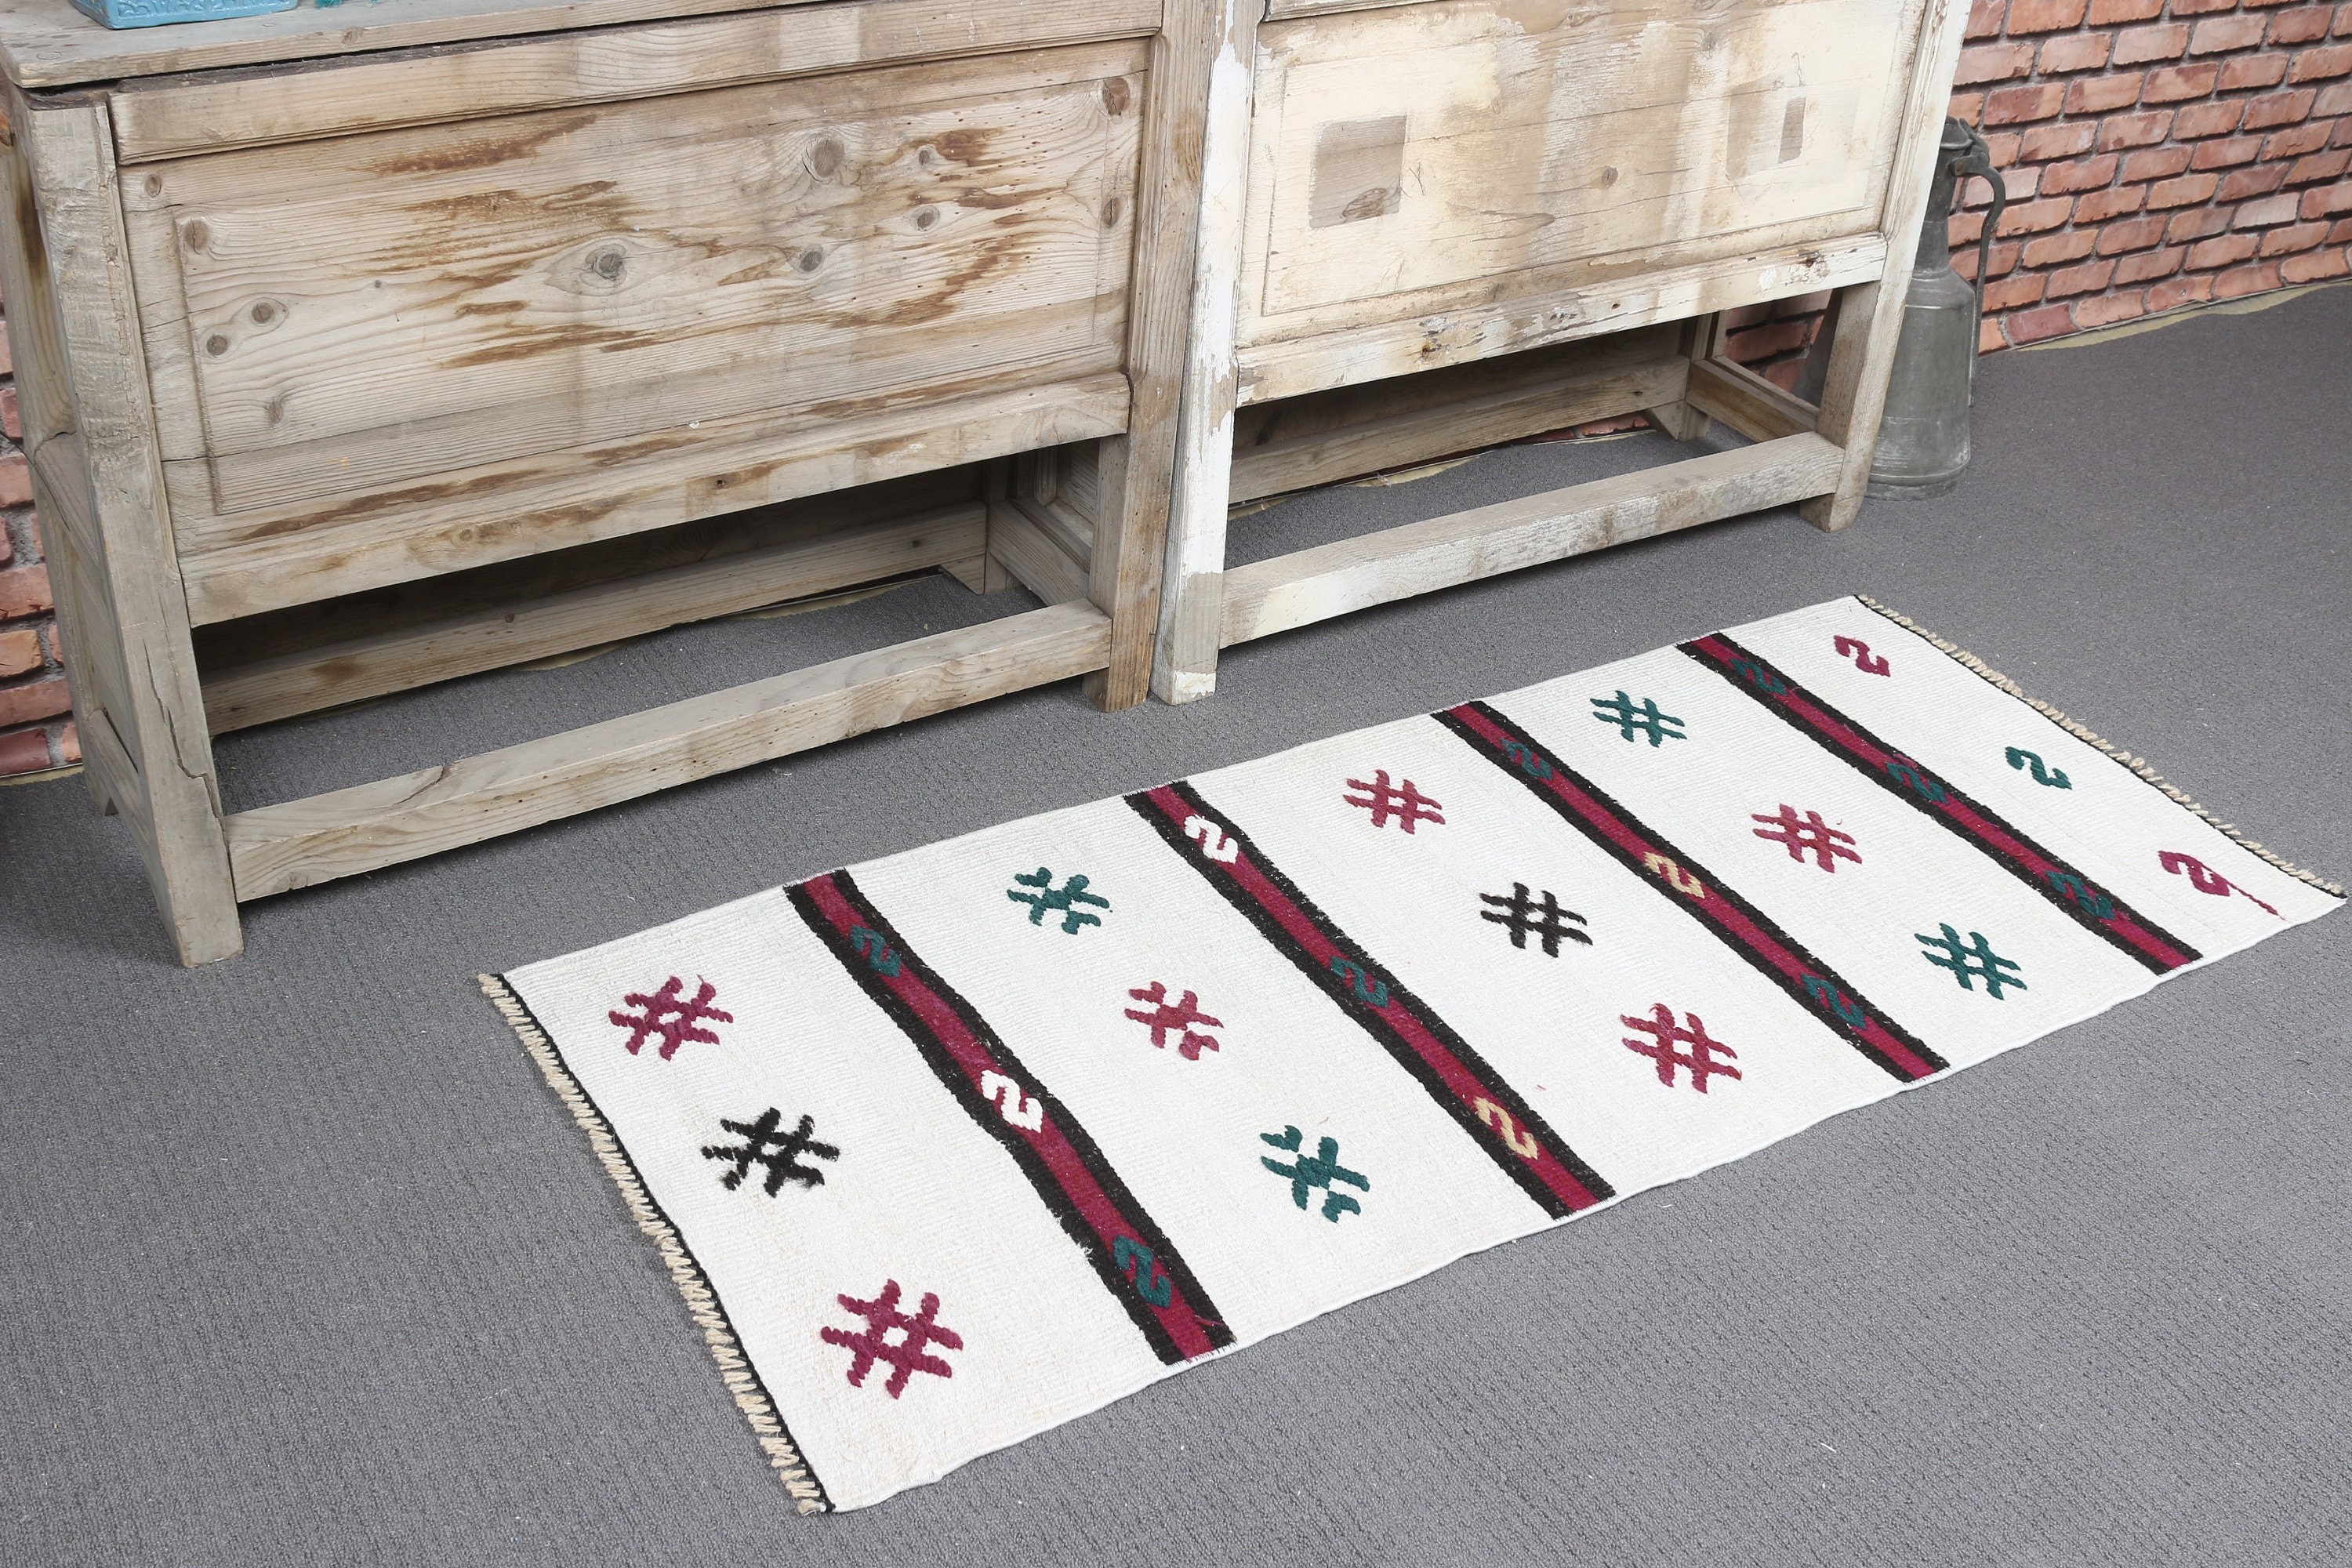 Hand Knotted Rug, Turkish Rug, Moroccan Rugs, White Wool Rug, Home Decor Rug, Vintage Rug, 1.8x4.2 ft Small Rugs, Nursery Rug, Car Mat Rugs